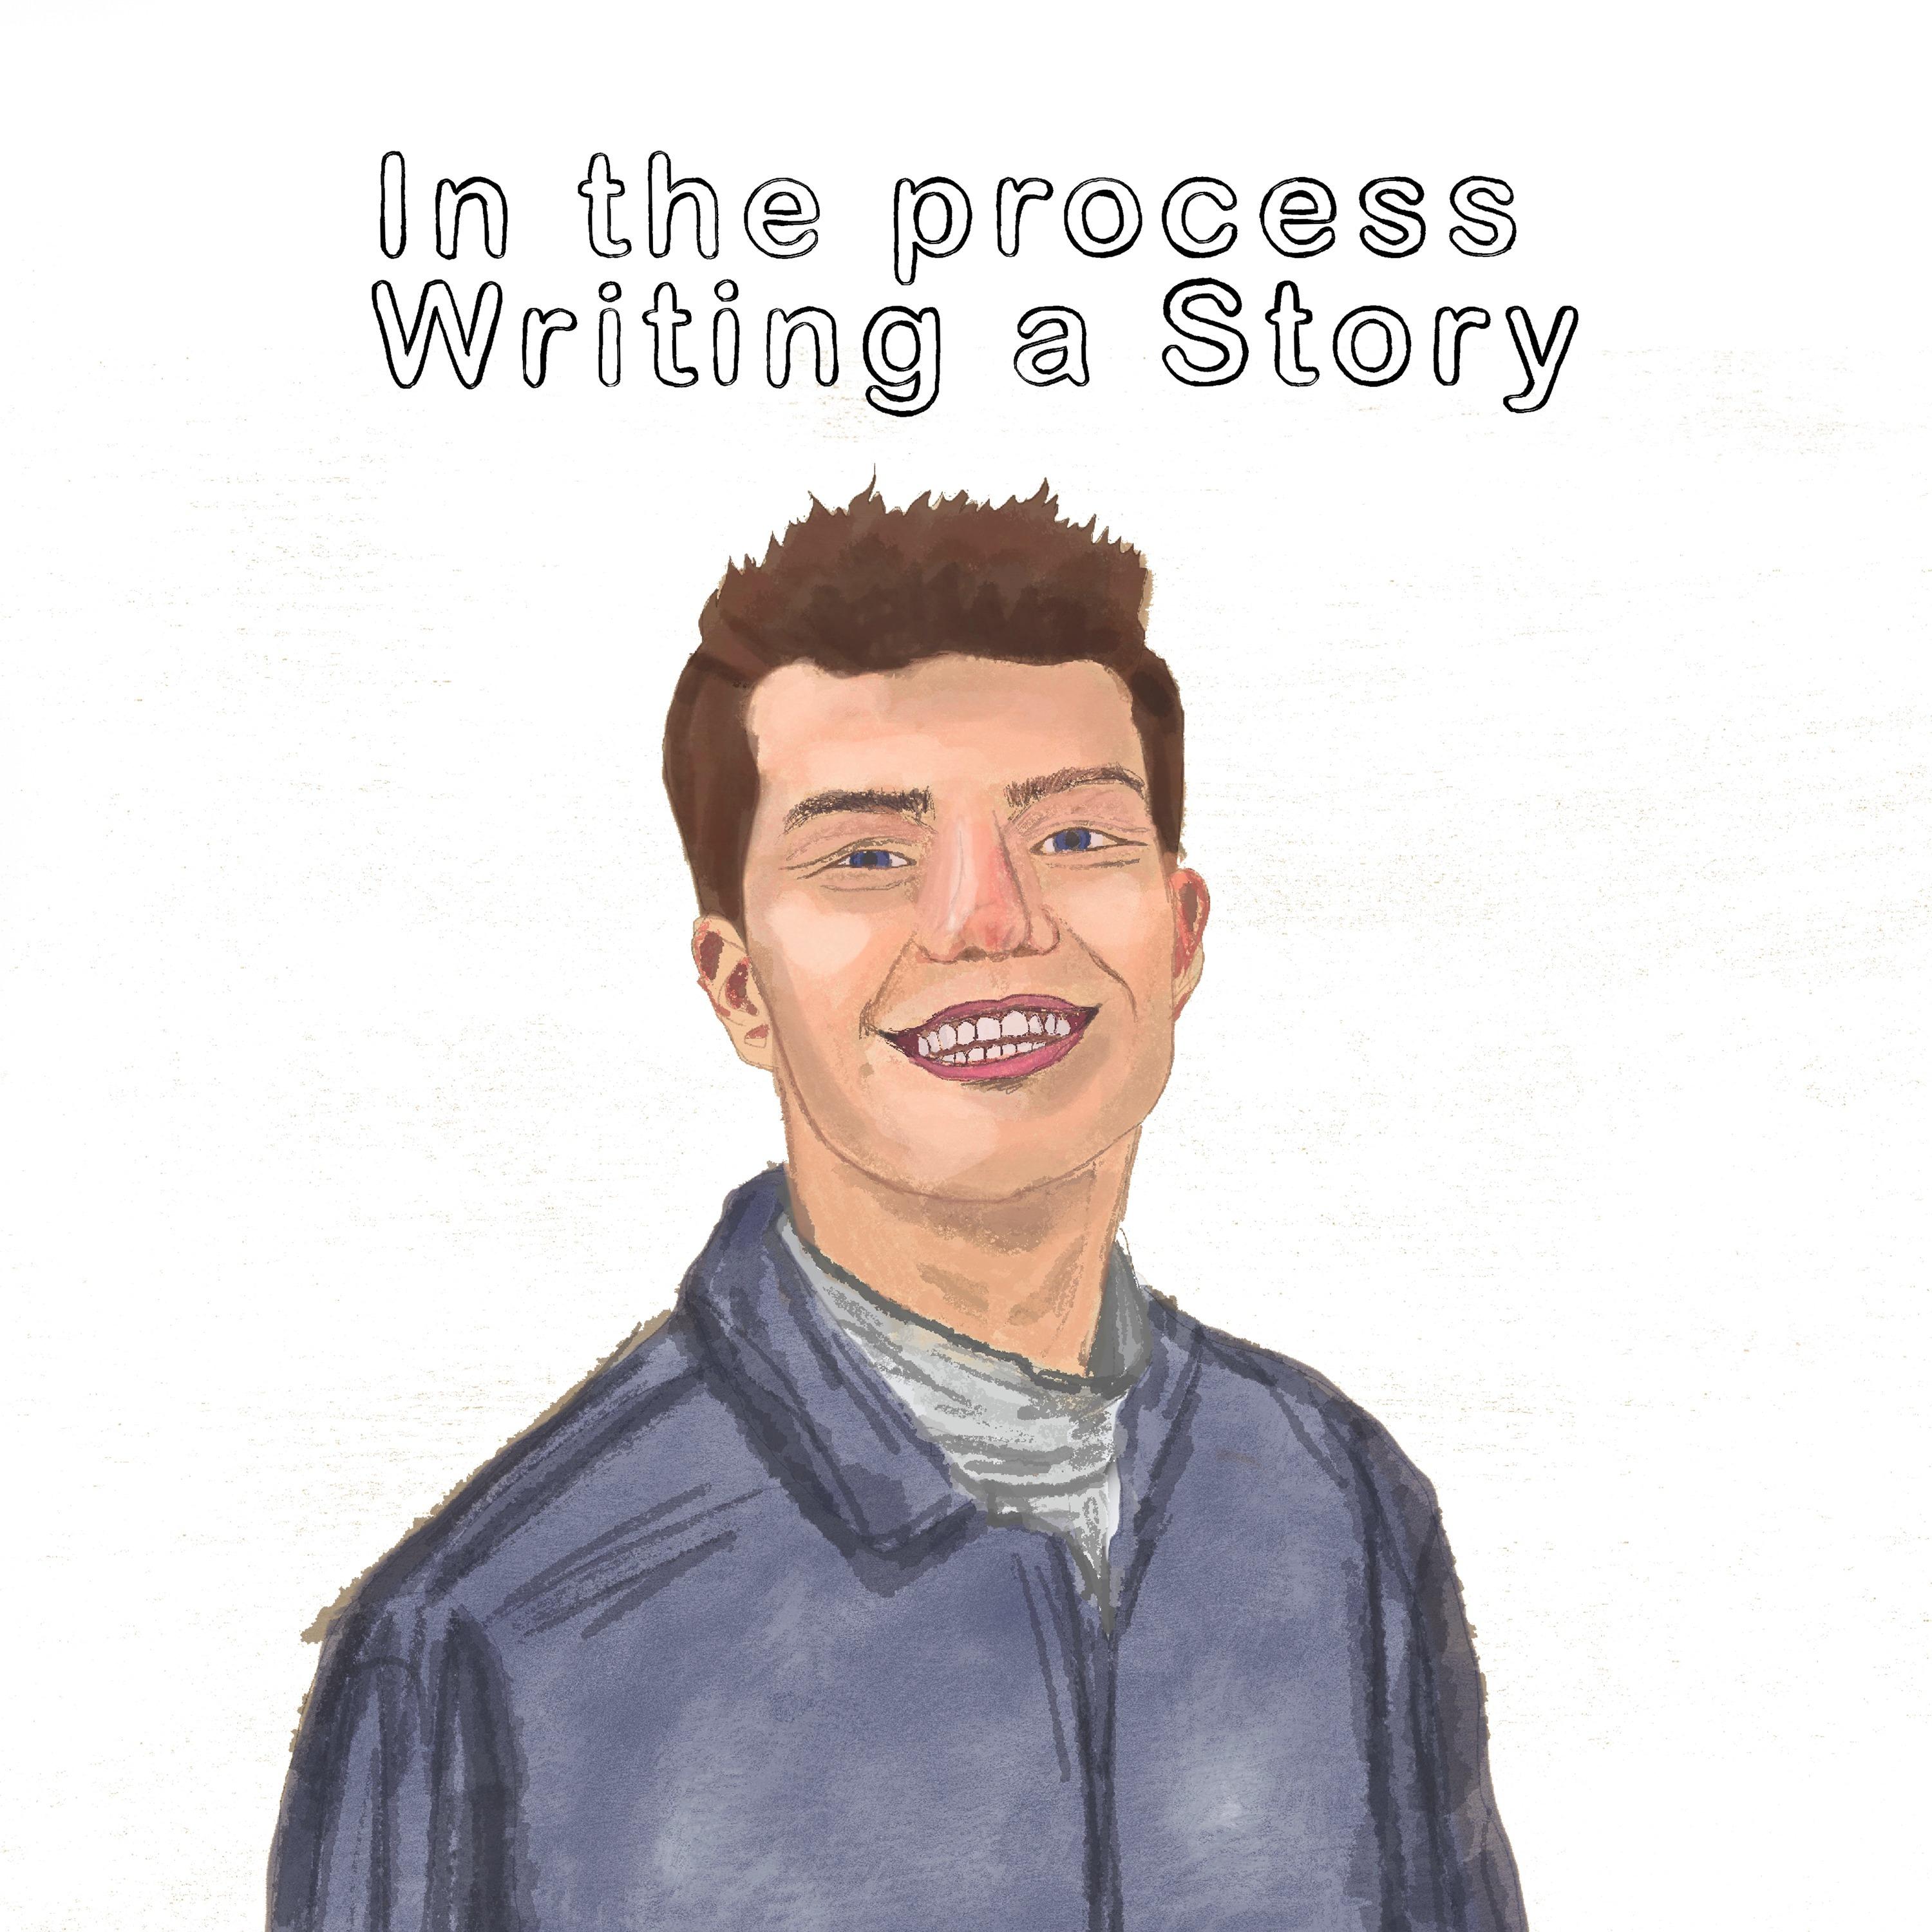 In The Process, Writing a Story